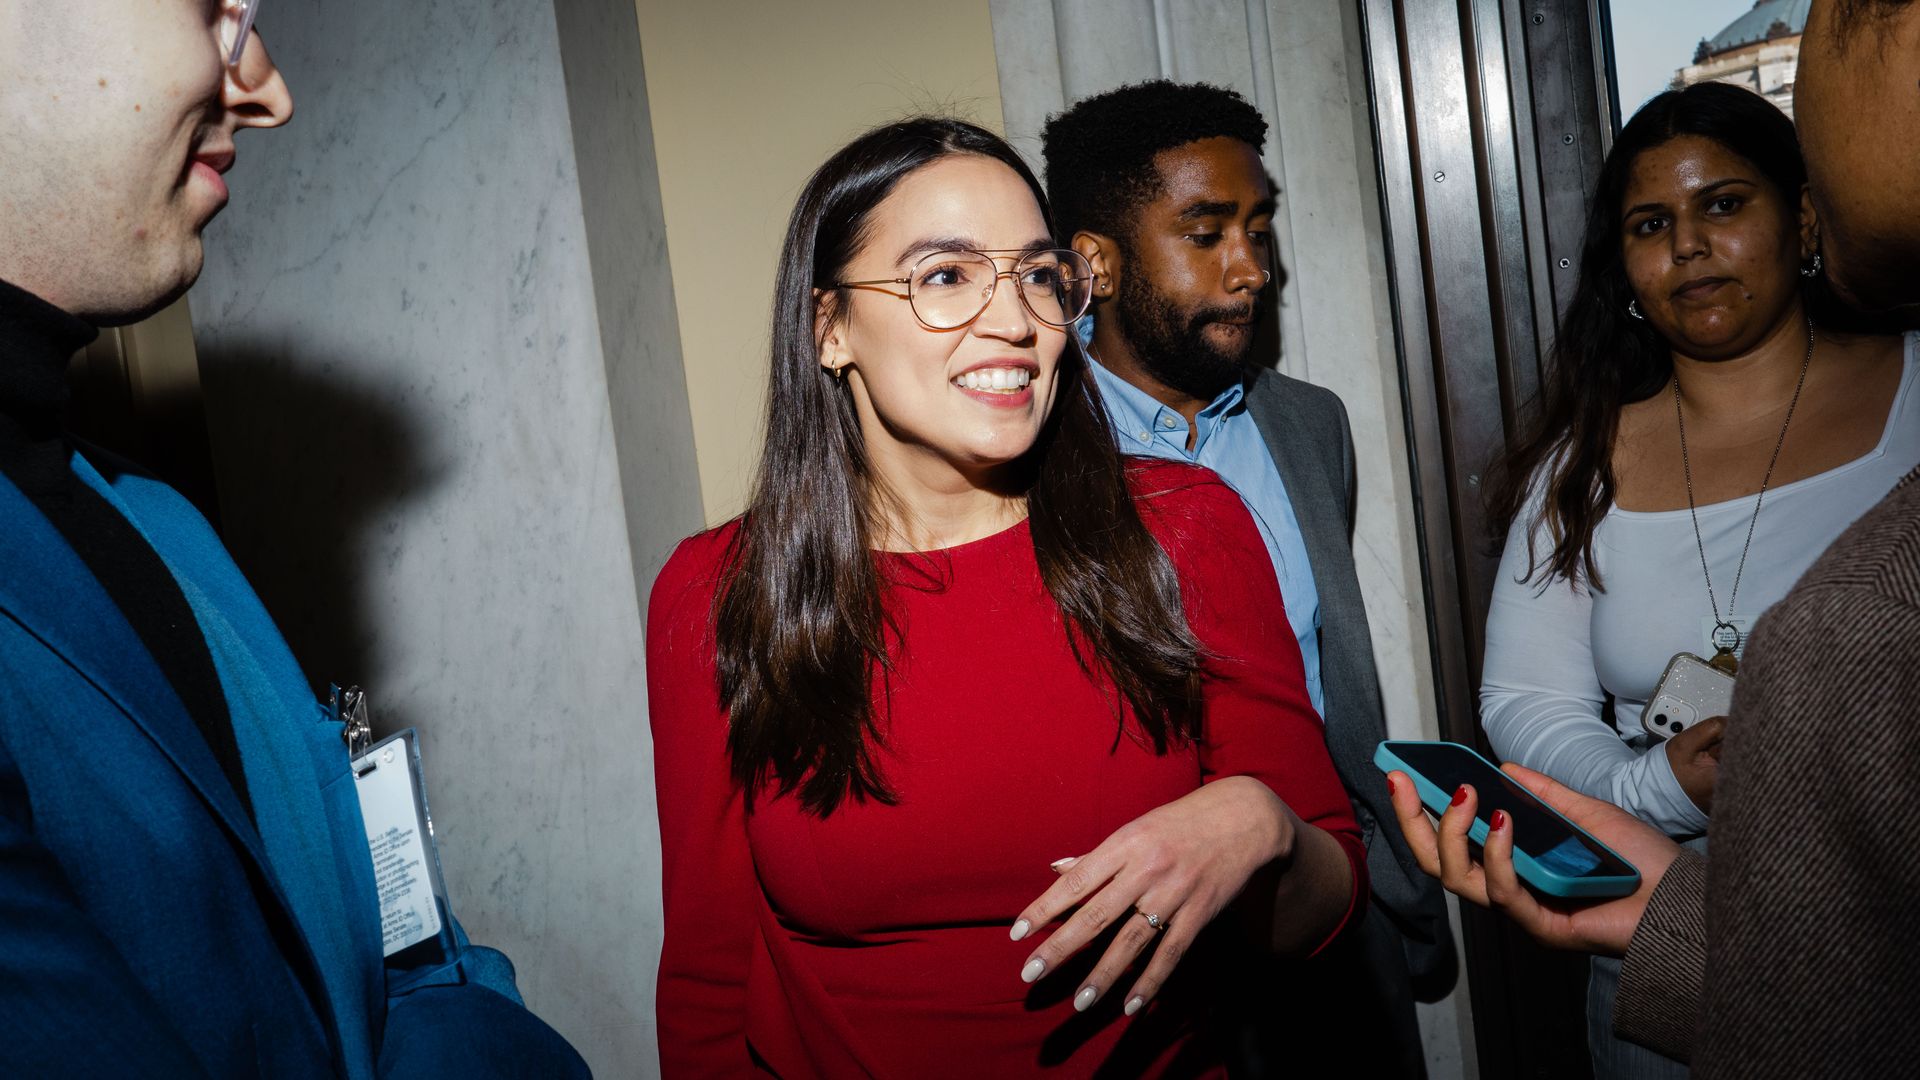 AOC to run for reelection, not Senate, in 2024